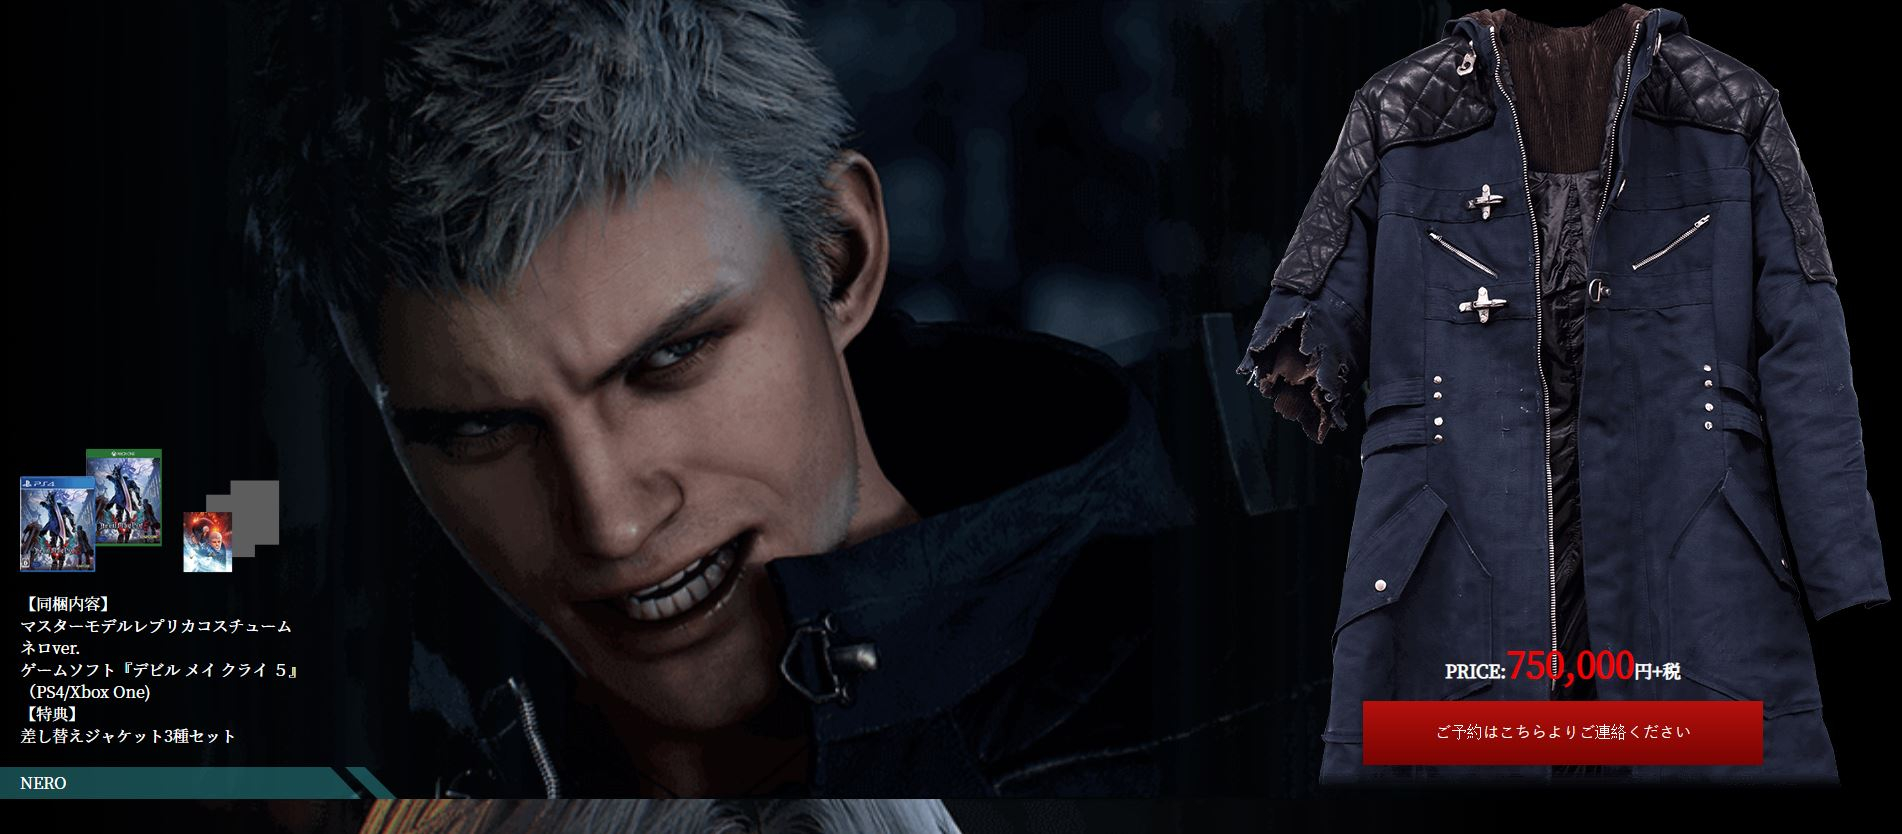 Devil May Cry 5 Ultra Limited Edition